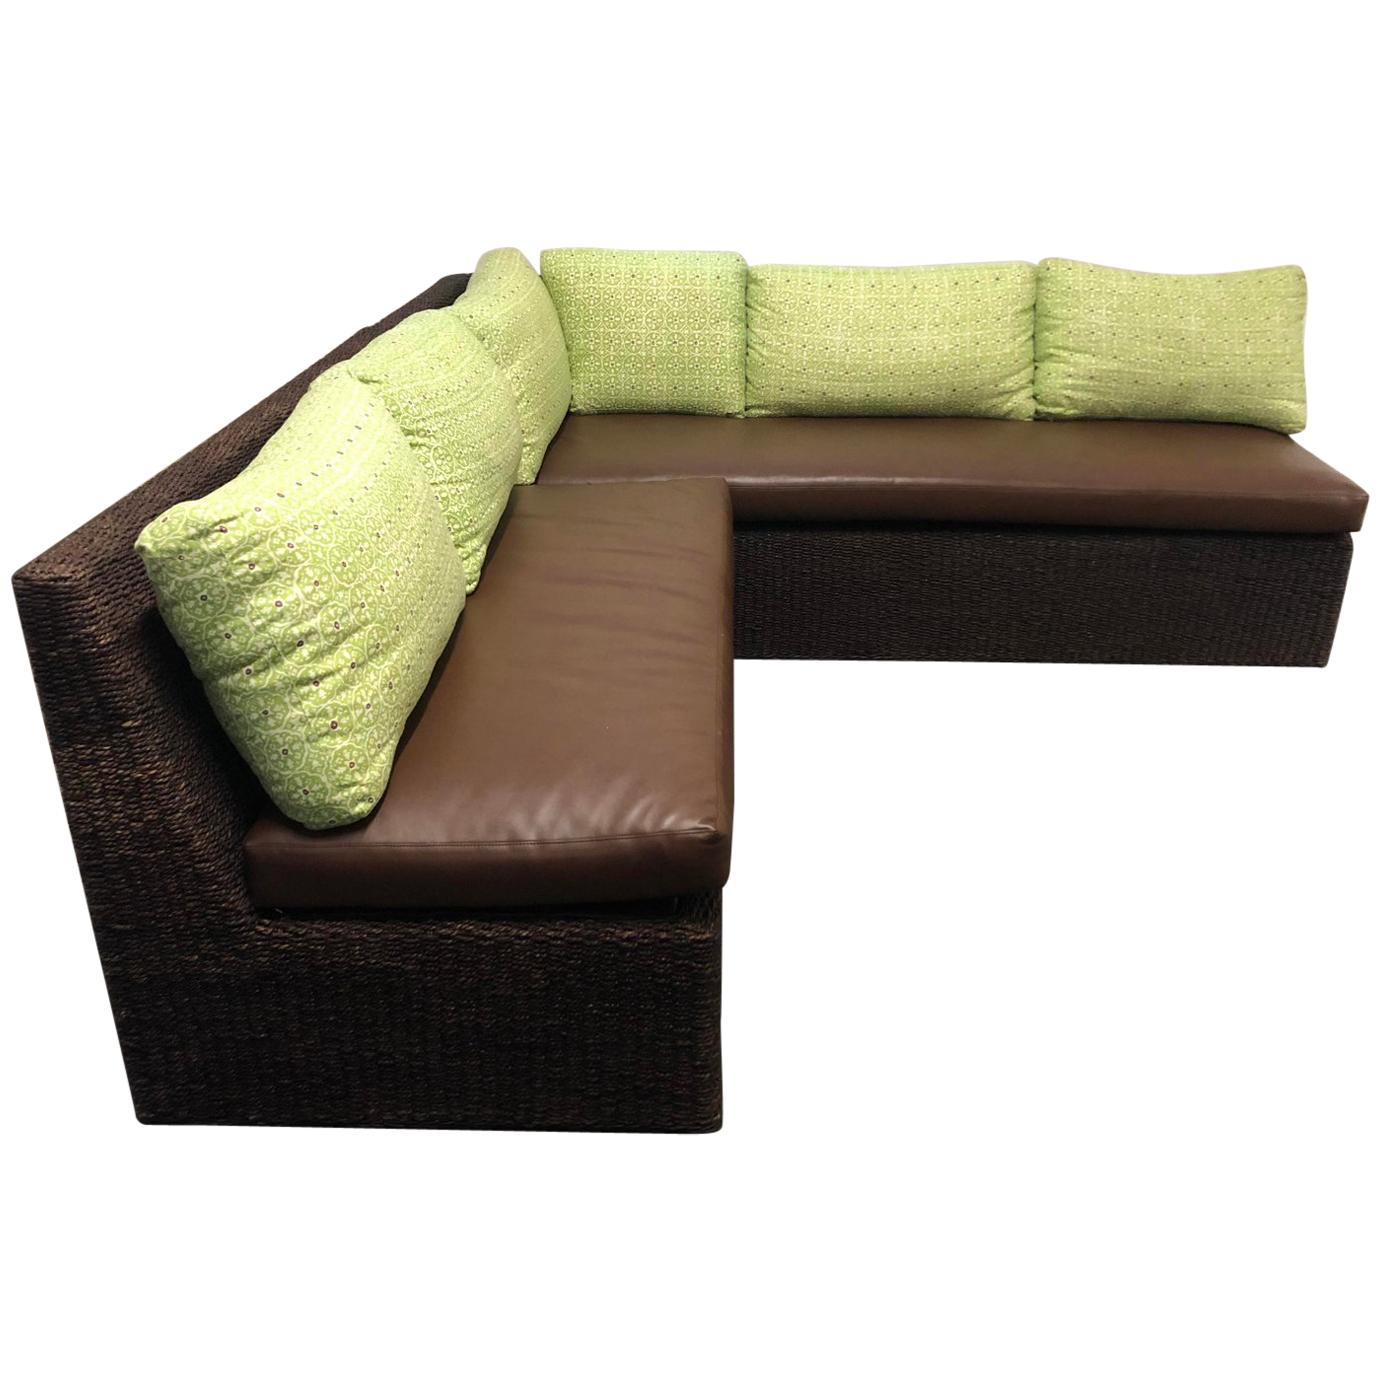 Walter's Wicker Works Two-Piece Sectional im Angebot